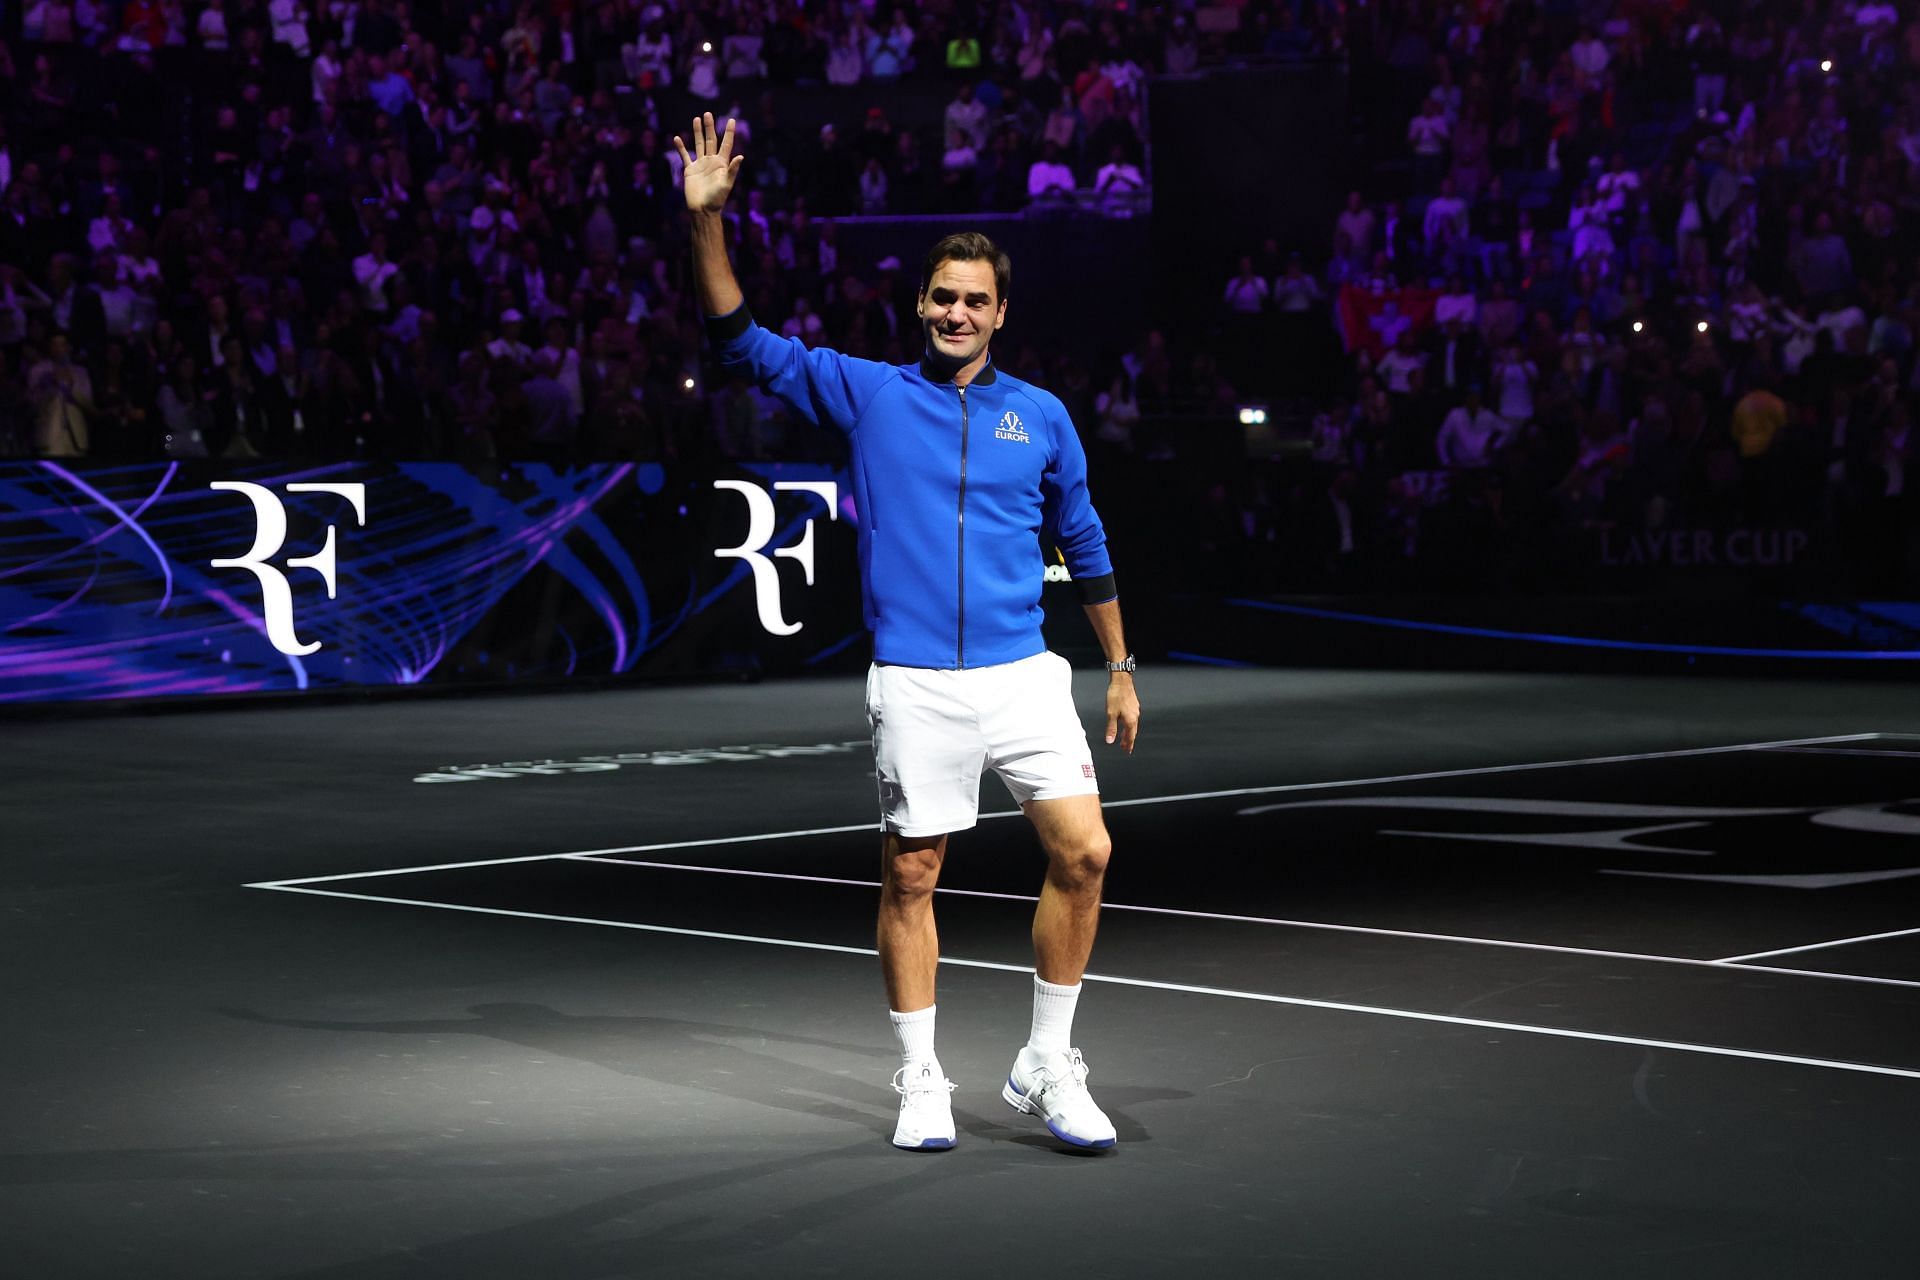 Roger Federer at the Laver Cup 2022 - Day One